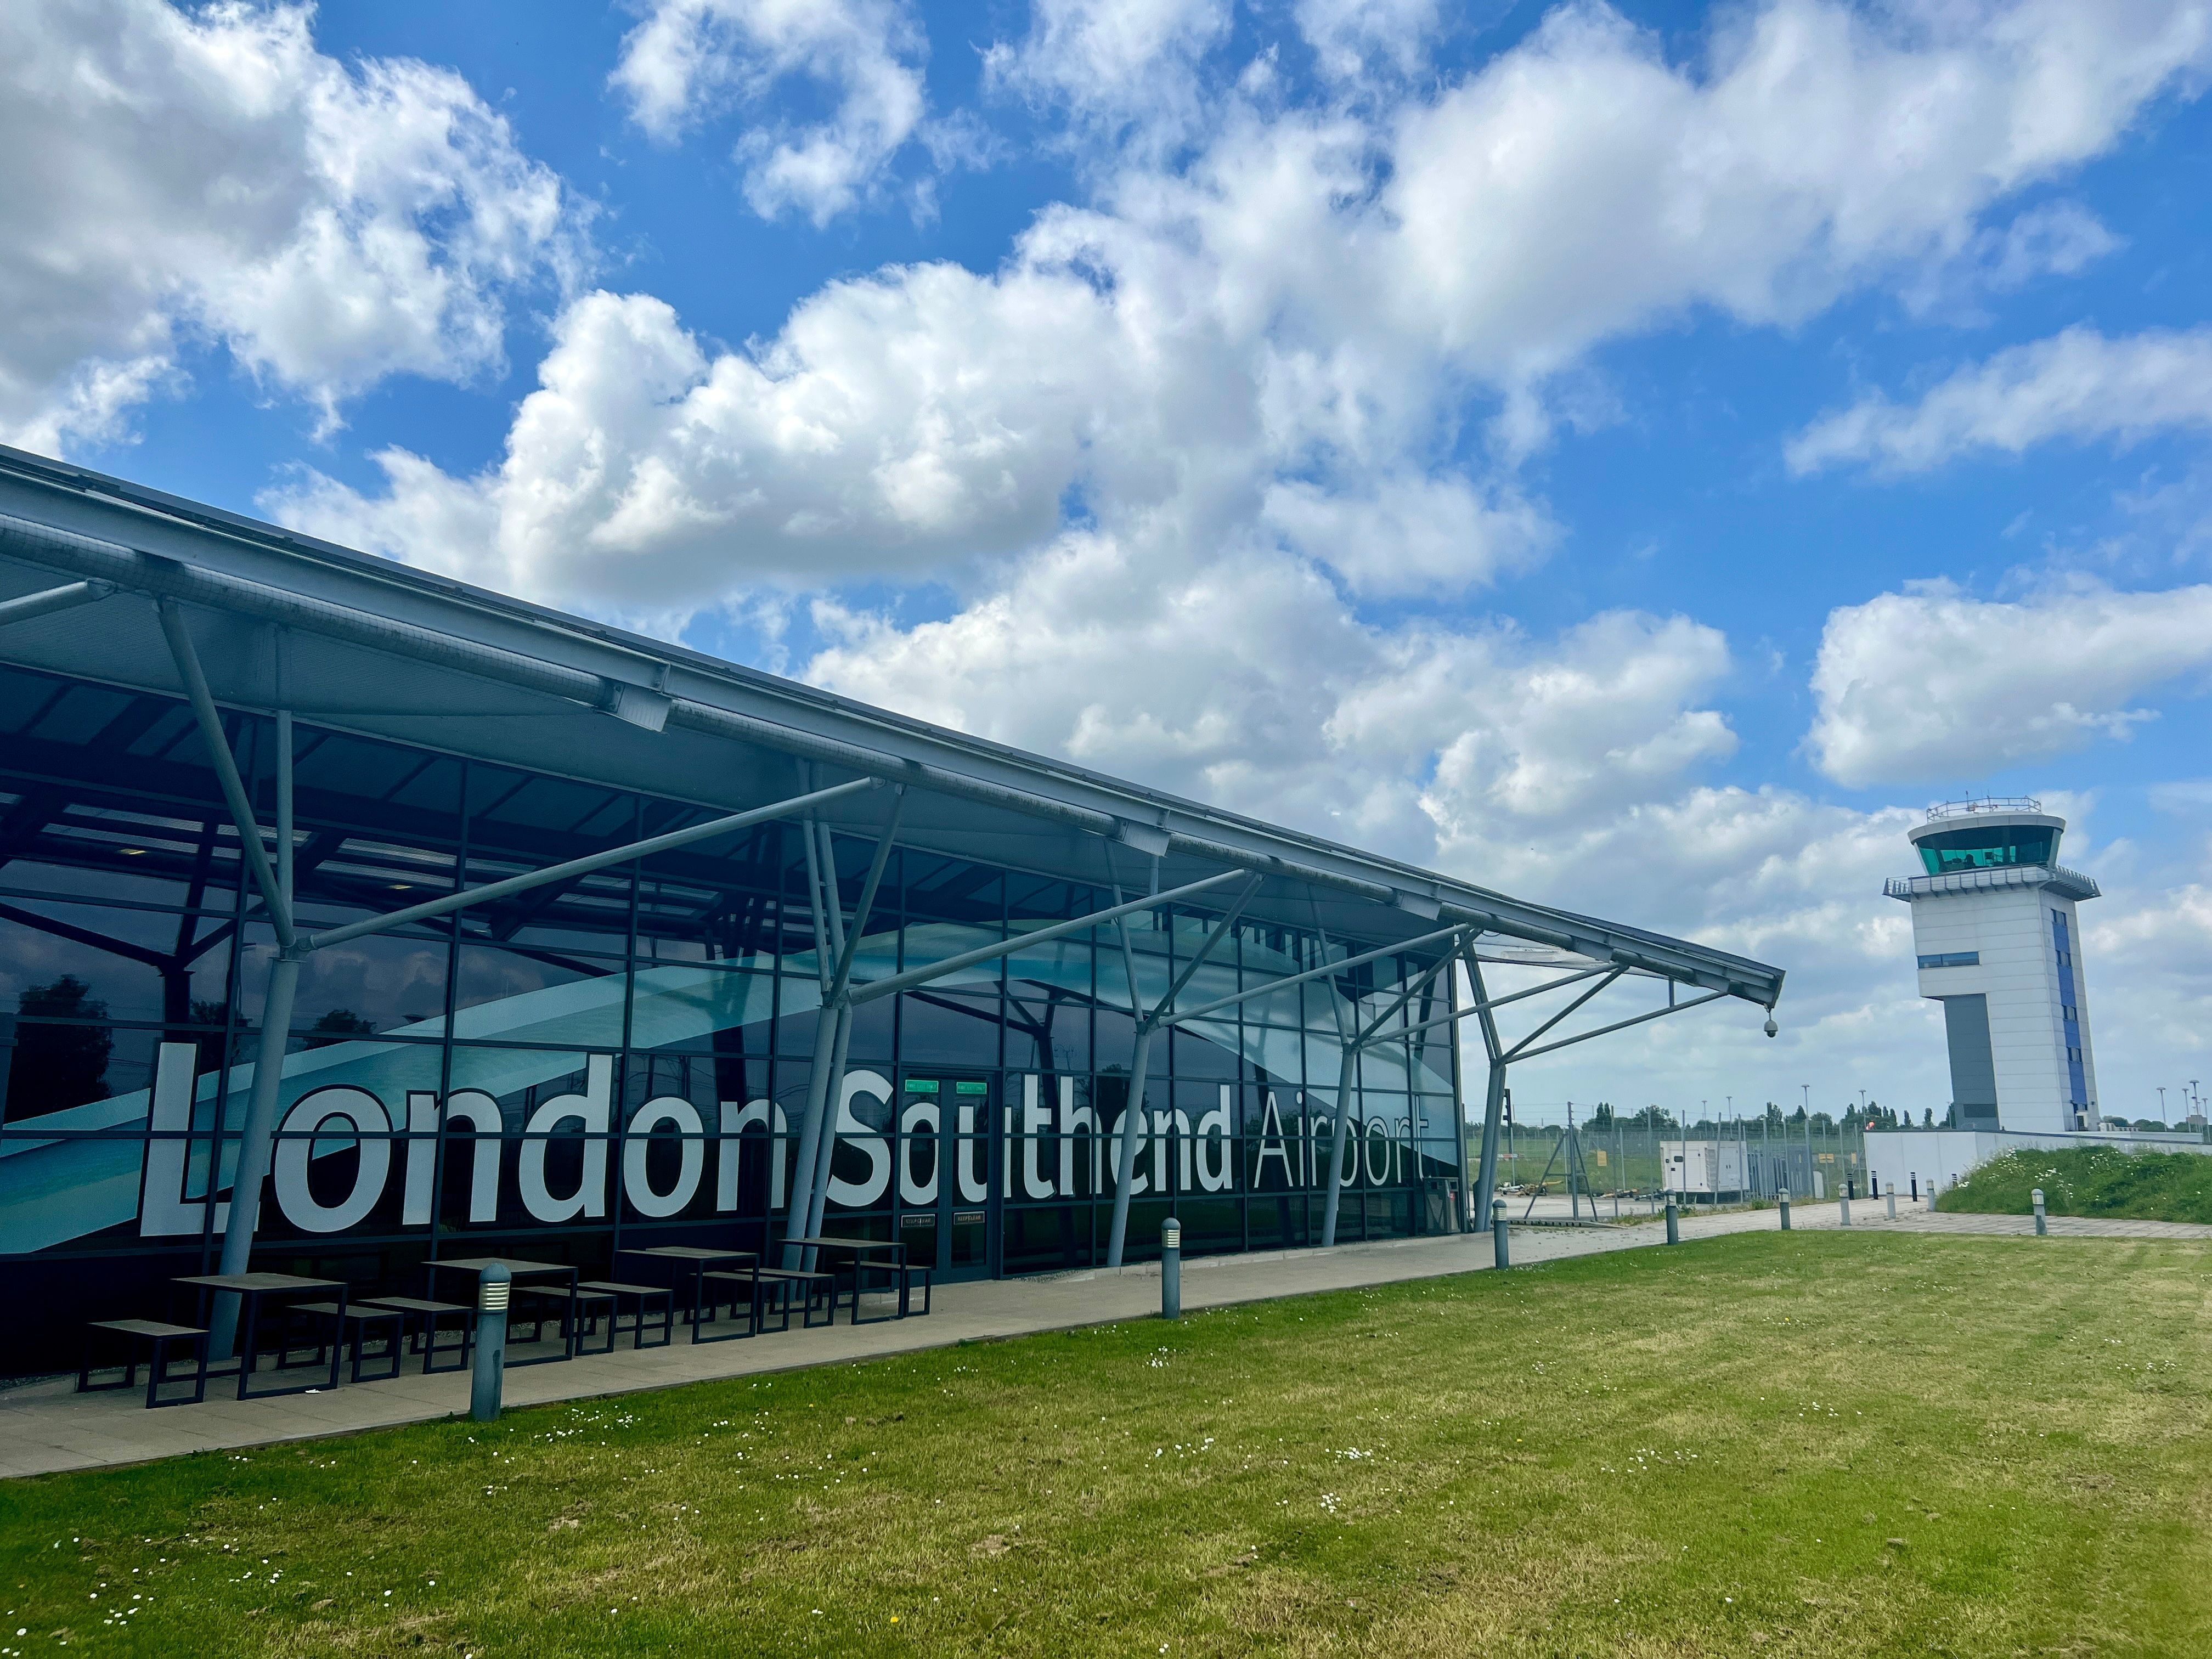 View of London Southend airport's exterior entrance and control tower.